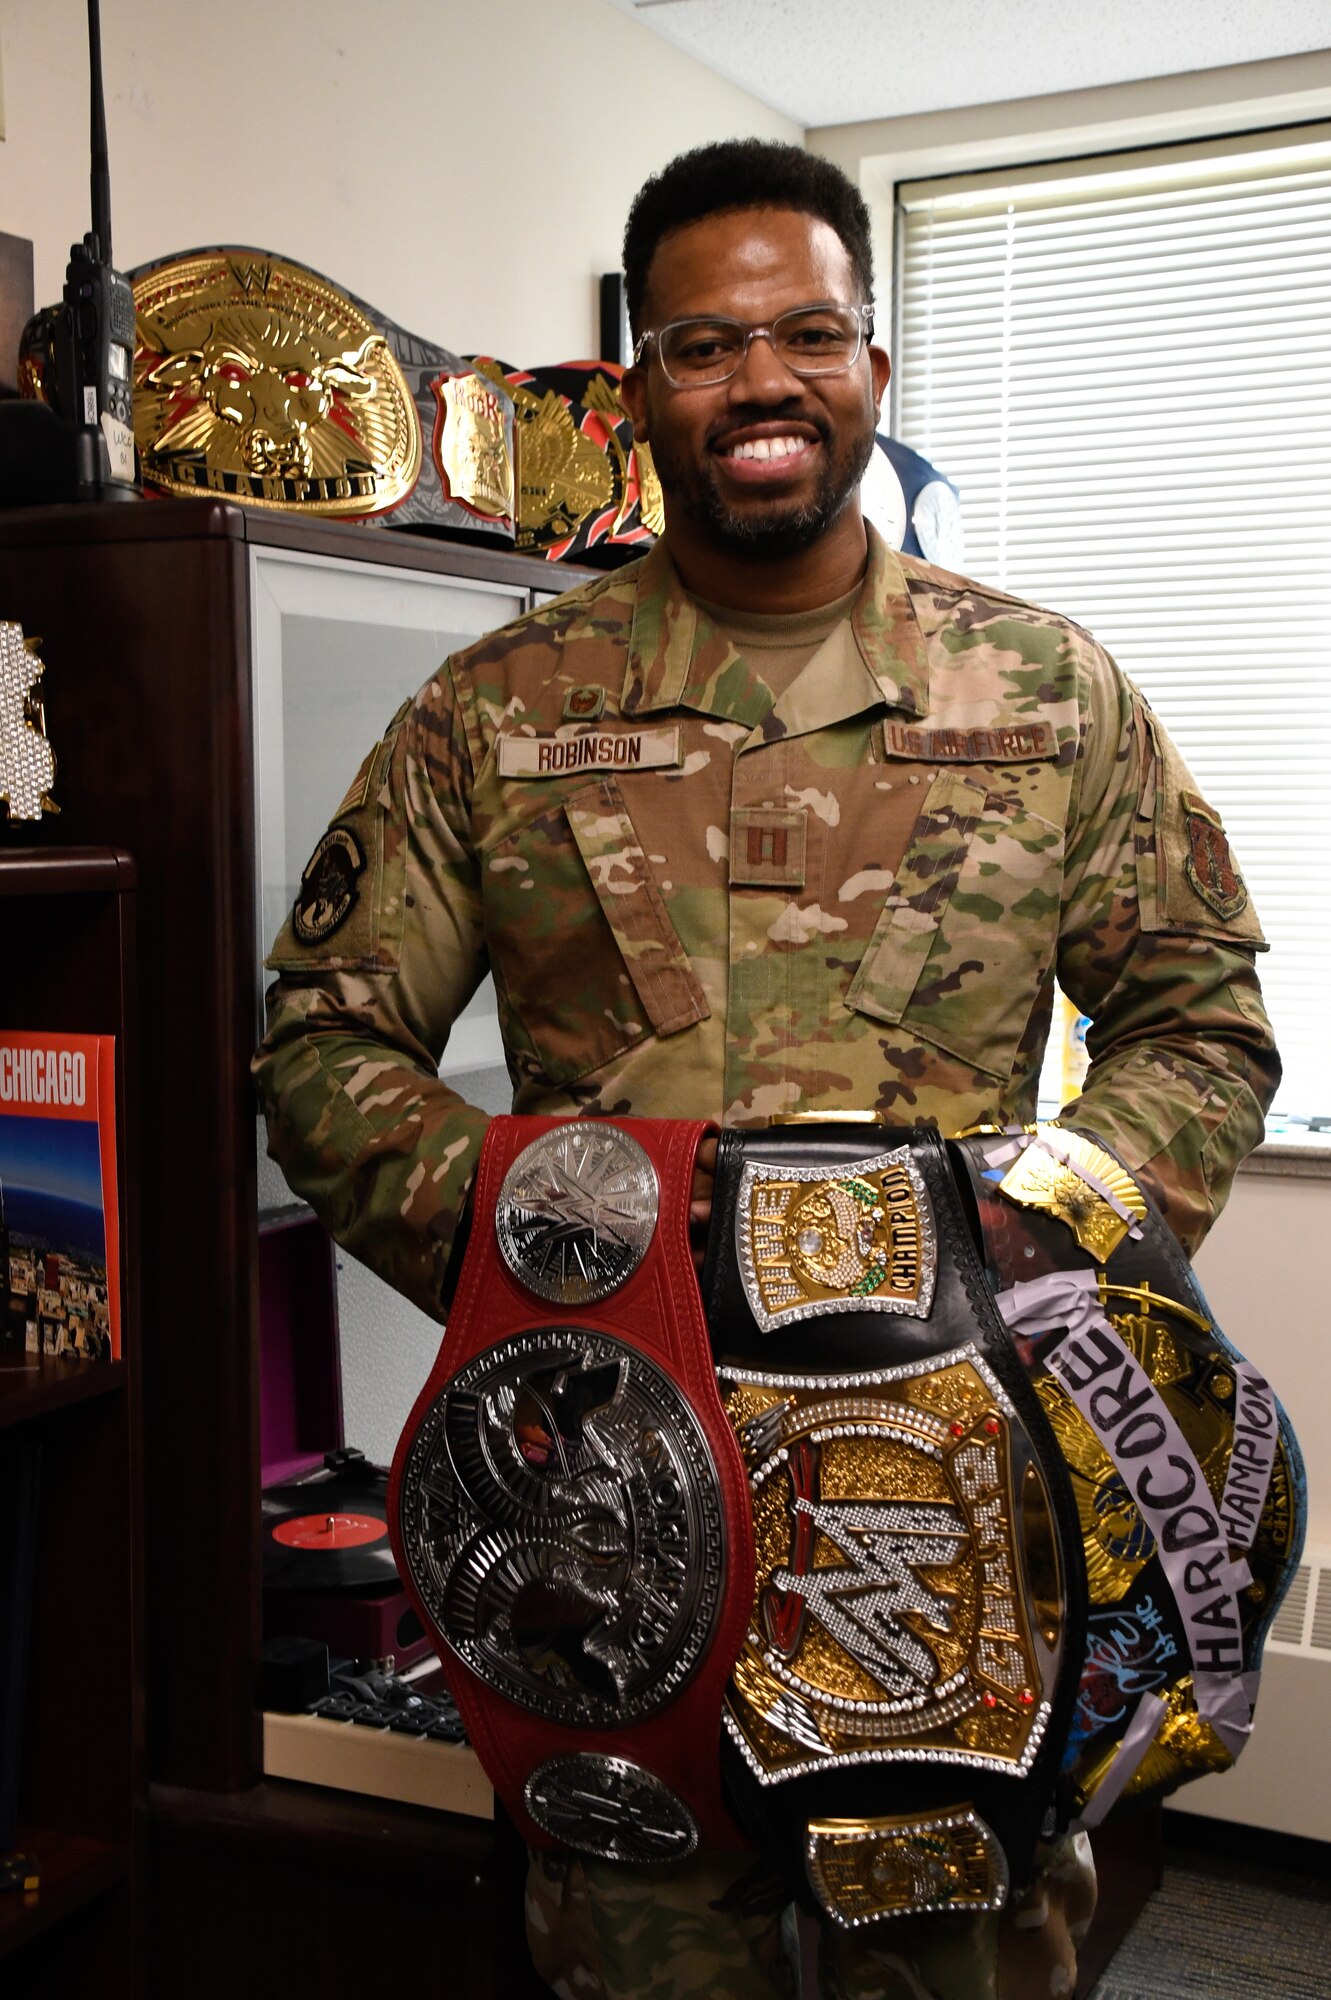 Capt. Anthony Robinson, 168th Communications Squadron commander, poses for a photo holding wrestling championship belts representing his wife, mother, and grandmother in his office. The wrestling belts are on display in his office, reminding him of his loved ones, his family’s inspiration, memories spent with his family, where he has come from, and his upbringing. (U.S. Air National Guard photo by Senior Master Sgt. Julie Avey)